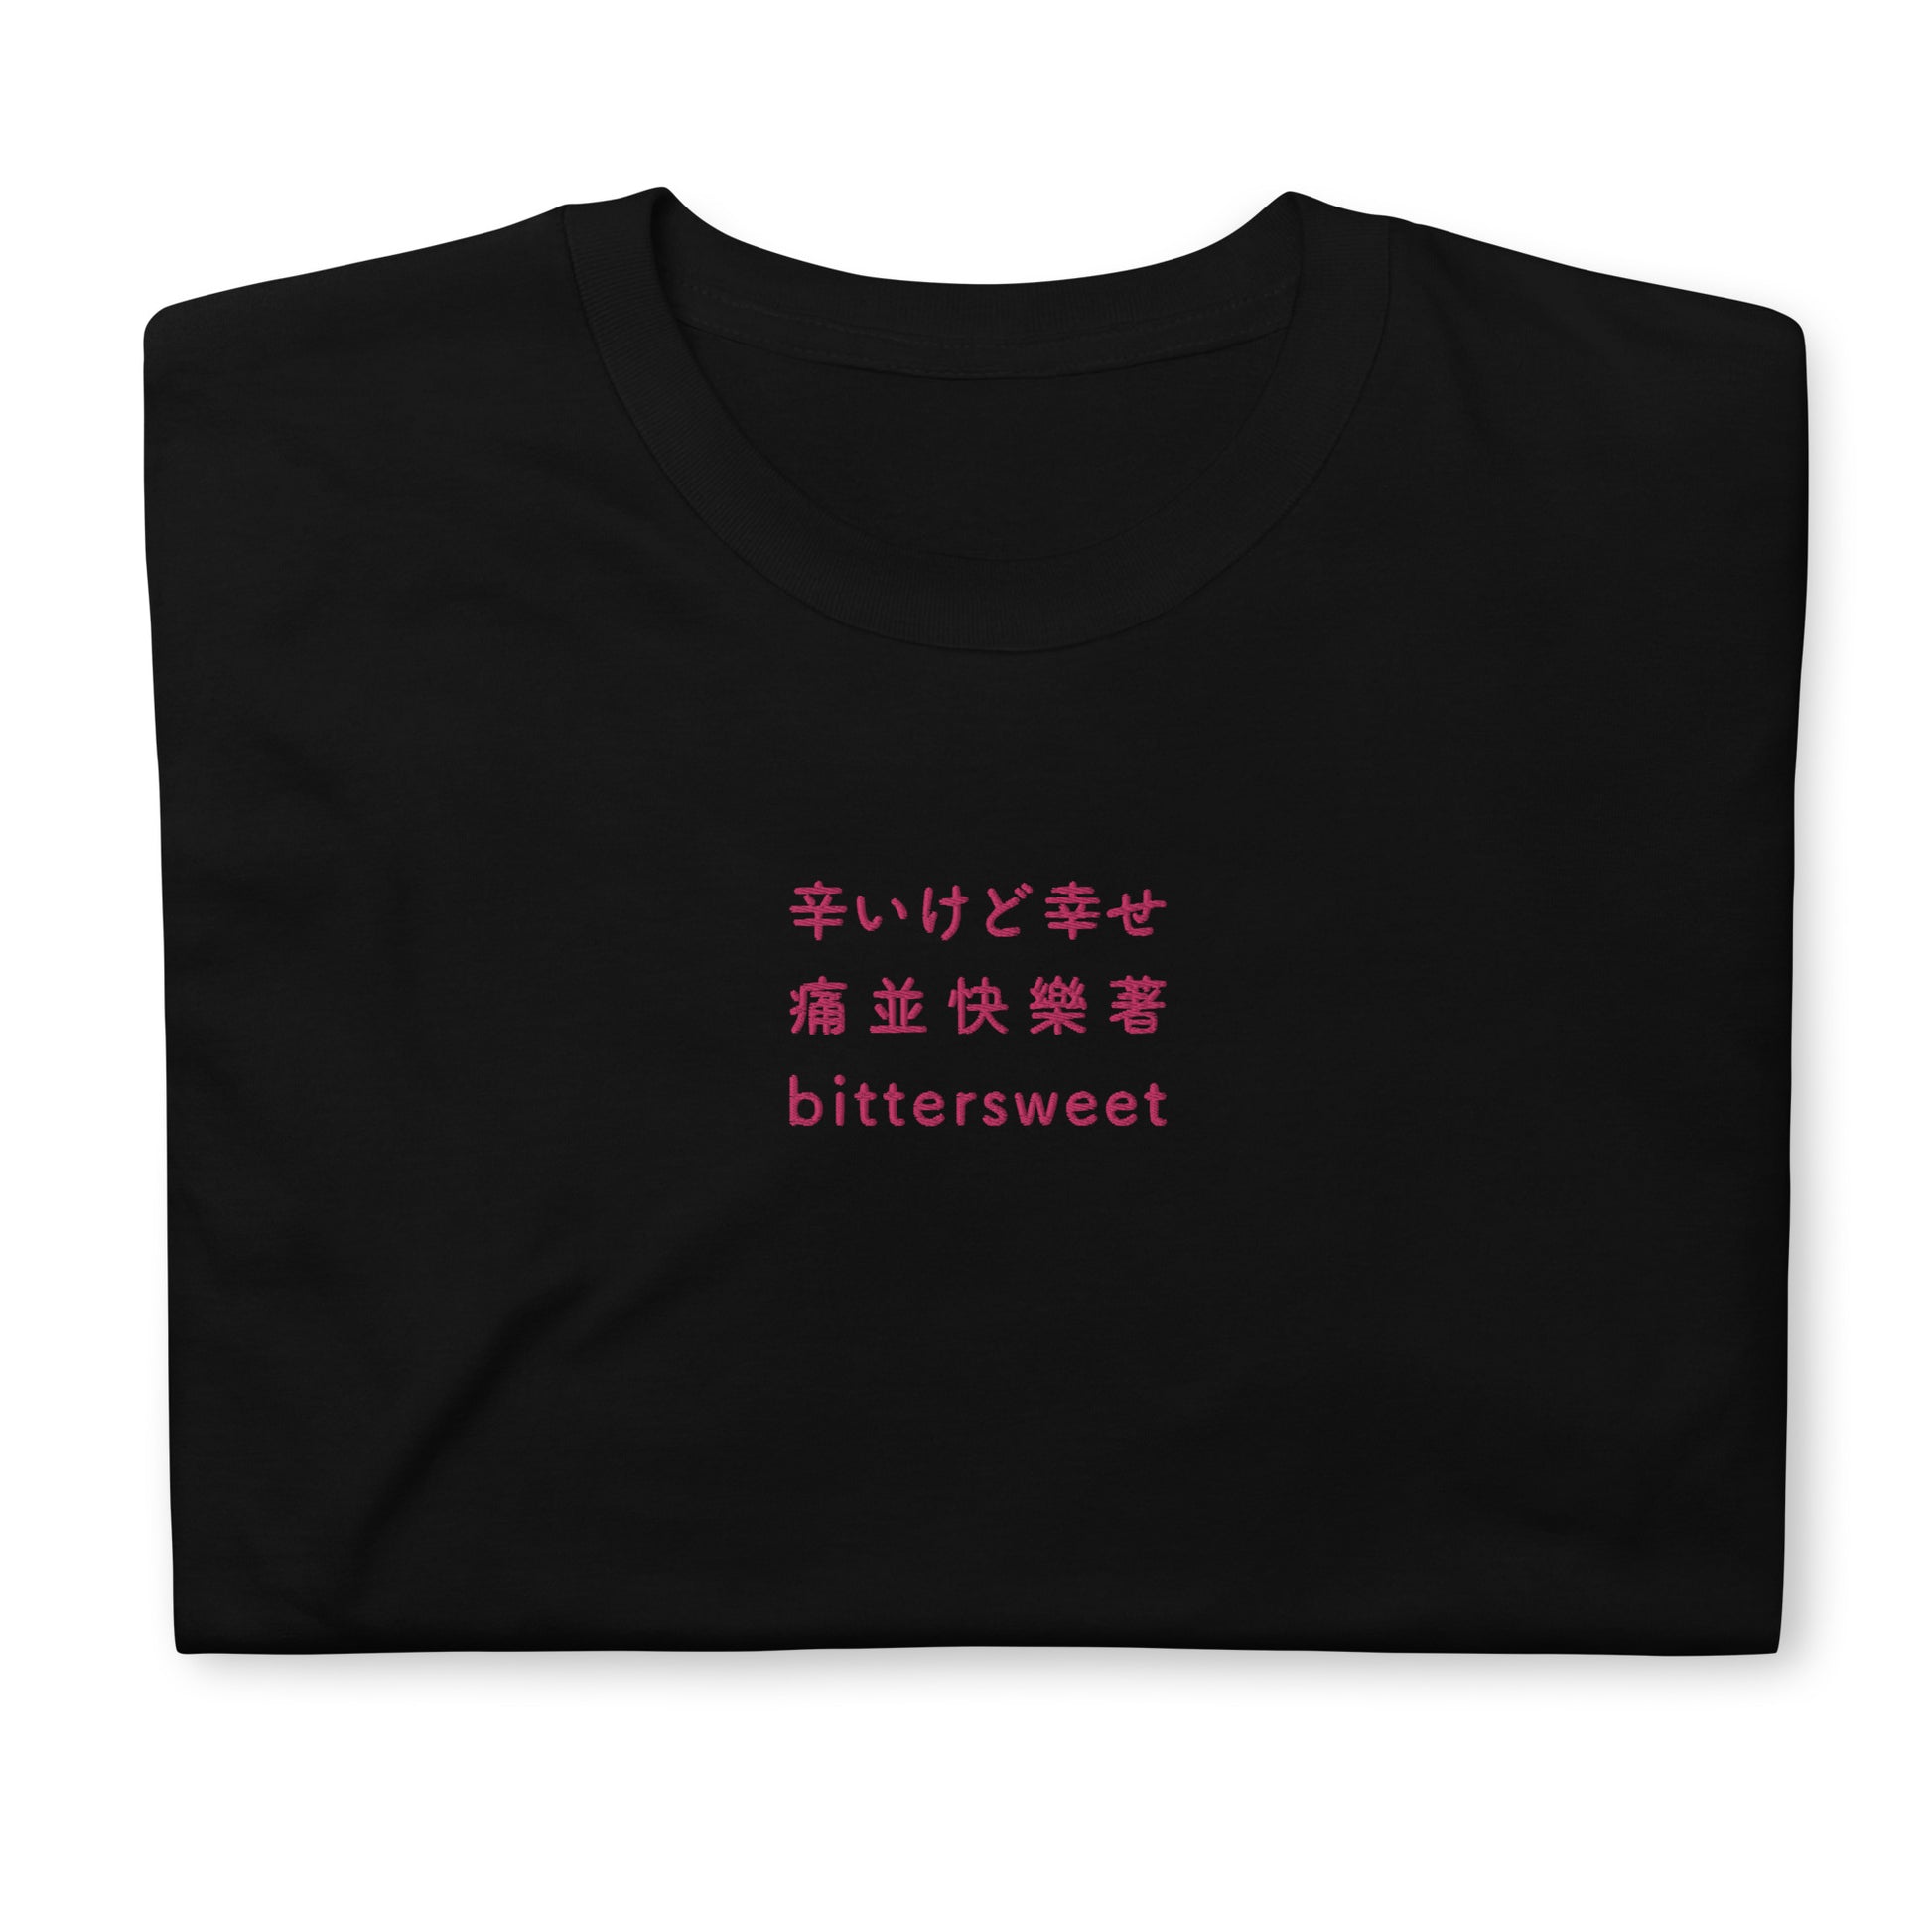 Black High Quality Tee - Front Design with an Pink Embroidery "Bittersweet" in Japanese,Chinese and English